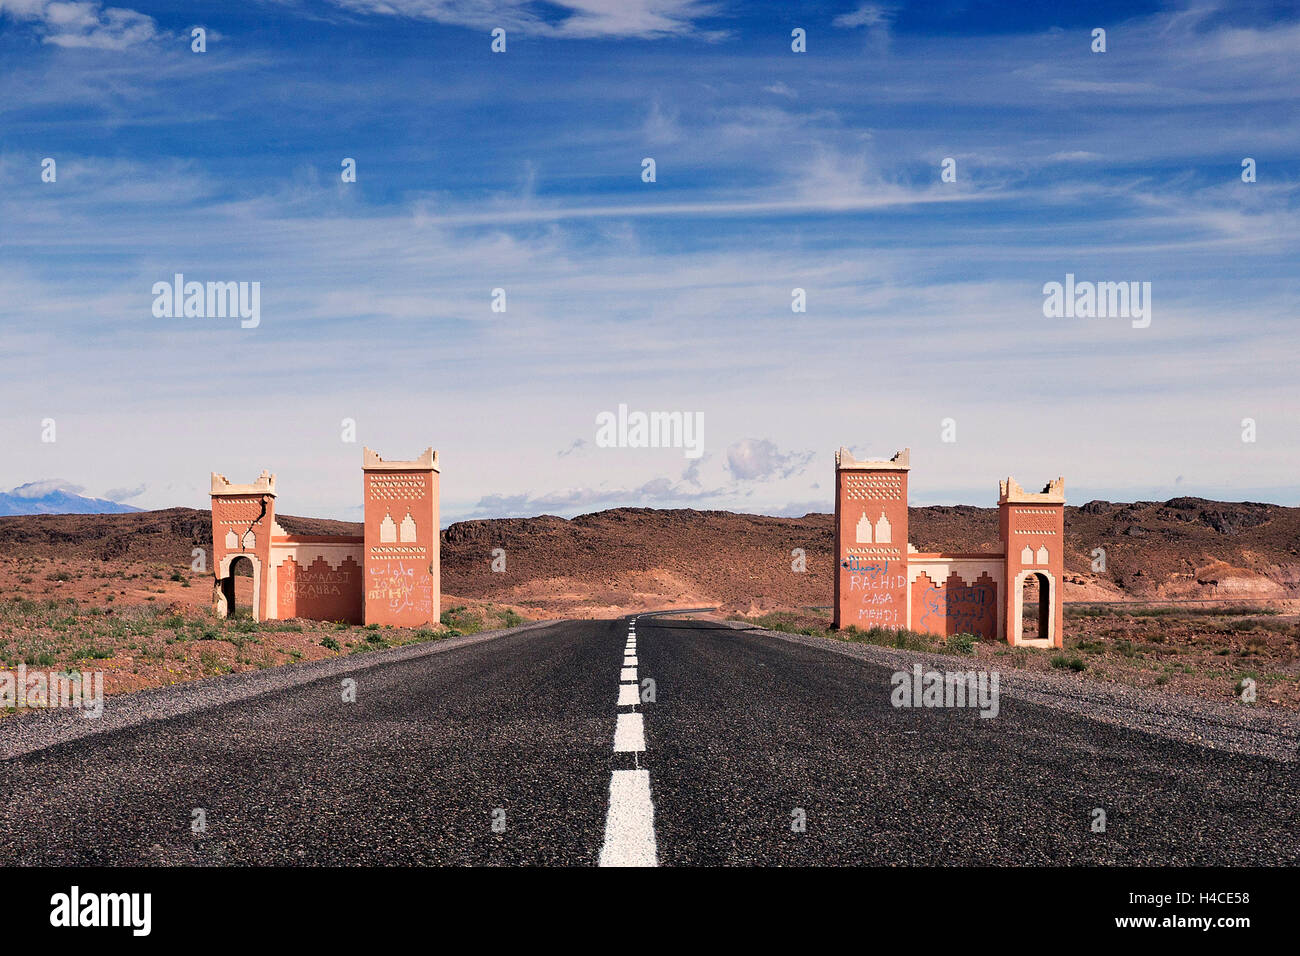 Street for the Atlas Mountains in Morocco Stock Photo